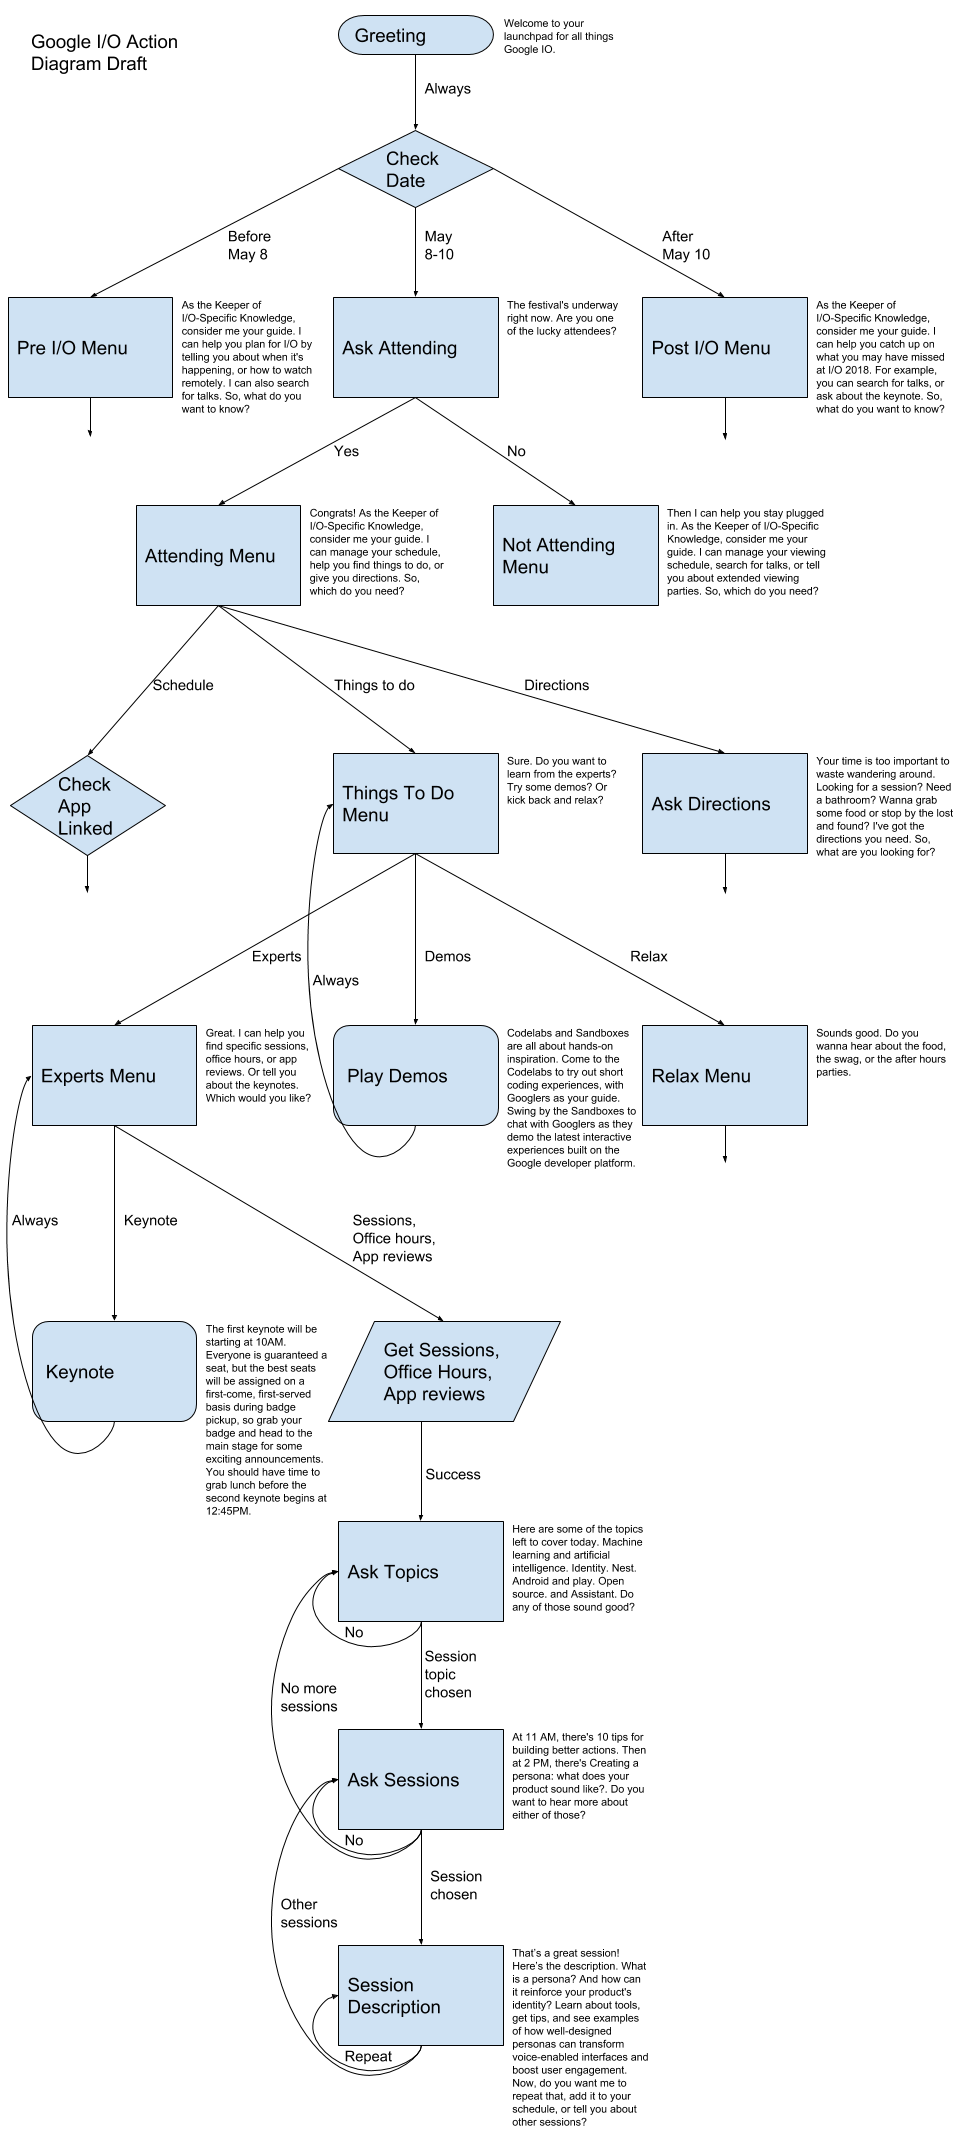 Image of a flowchart. All paths start with the Greeting then branch depending on whether it’s before, during or after I/O. If it’s during I/O, the path splits again based on whether or not the user is attending. Then there’s a series of menus that further branch the user experience.